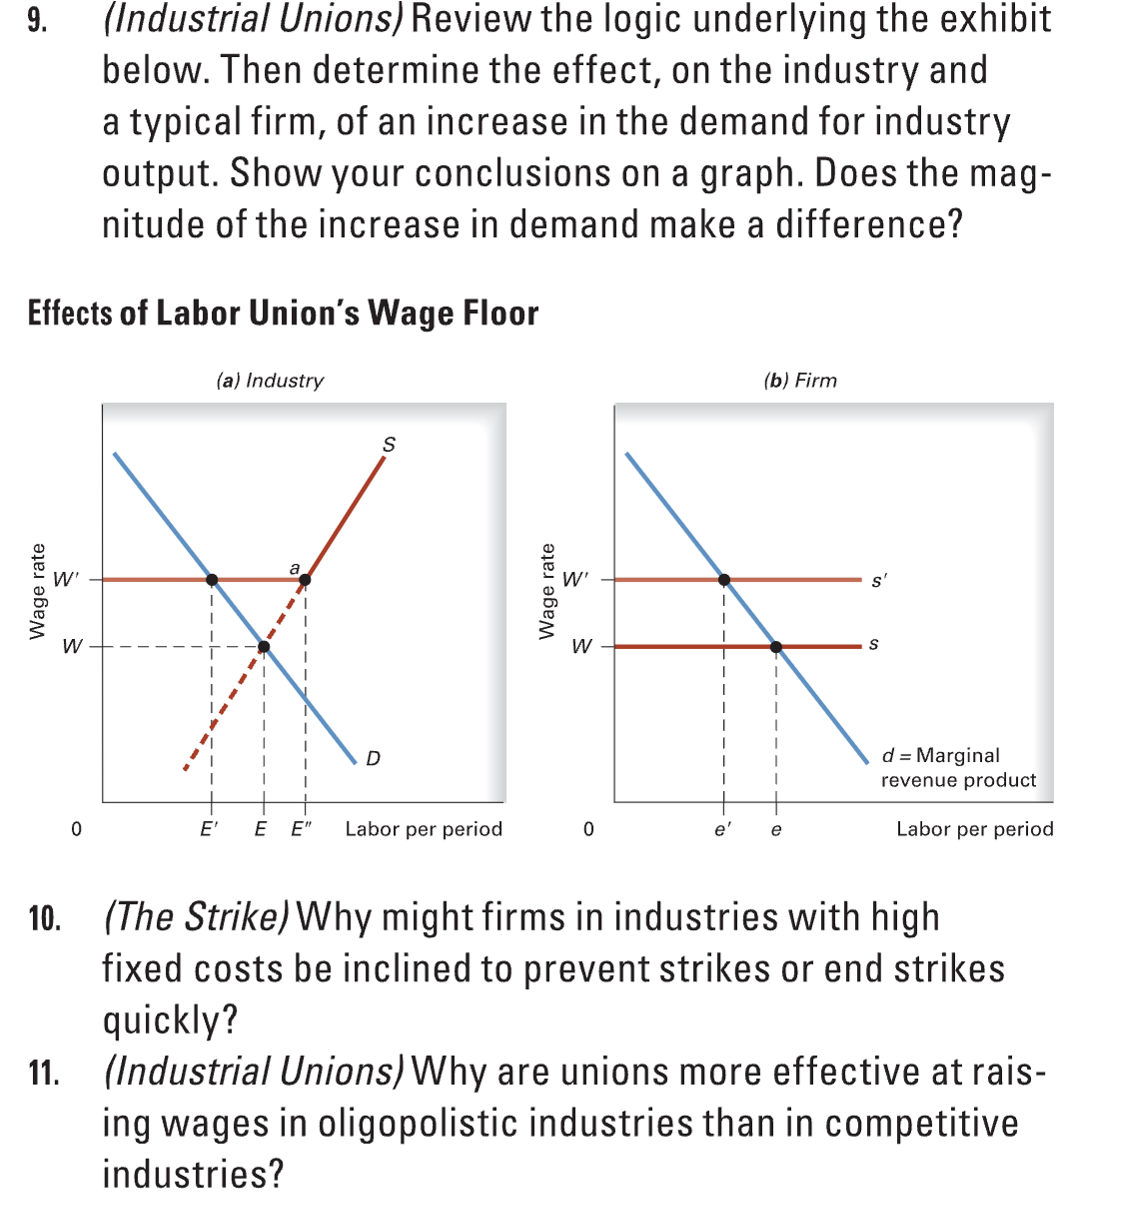 (Industrial Unions) Review the logic underlying the exhibit
below. Then determine the effect, on the industry and
a typical firm, of an increase in the demand for industry
output. Show your conclusions on a graph. Does the mag-
nitude of the increase in demand make a difference?
is of Labor Union's Wage Floor
